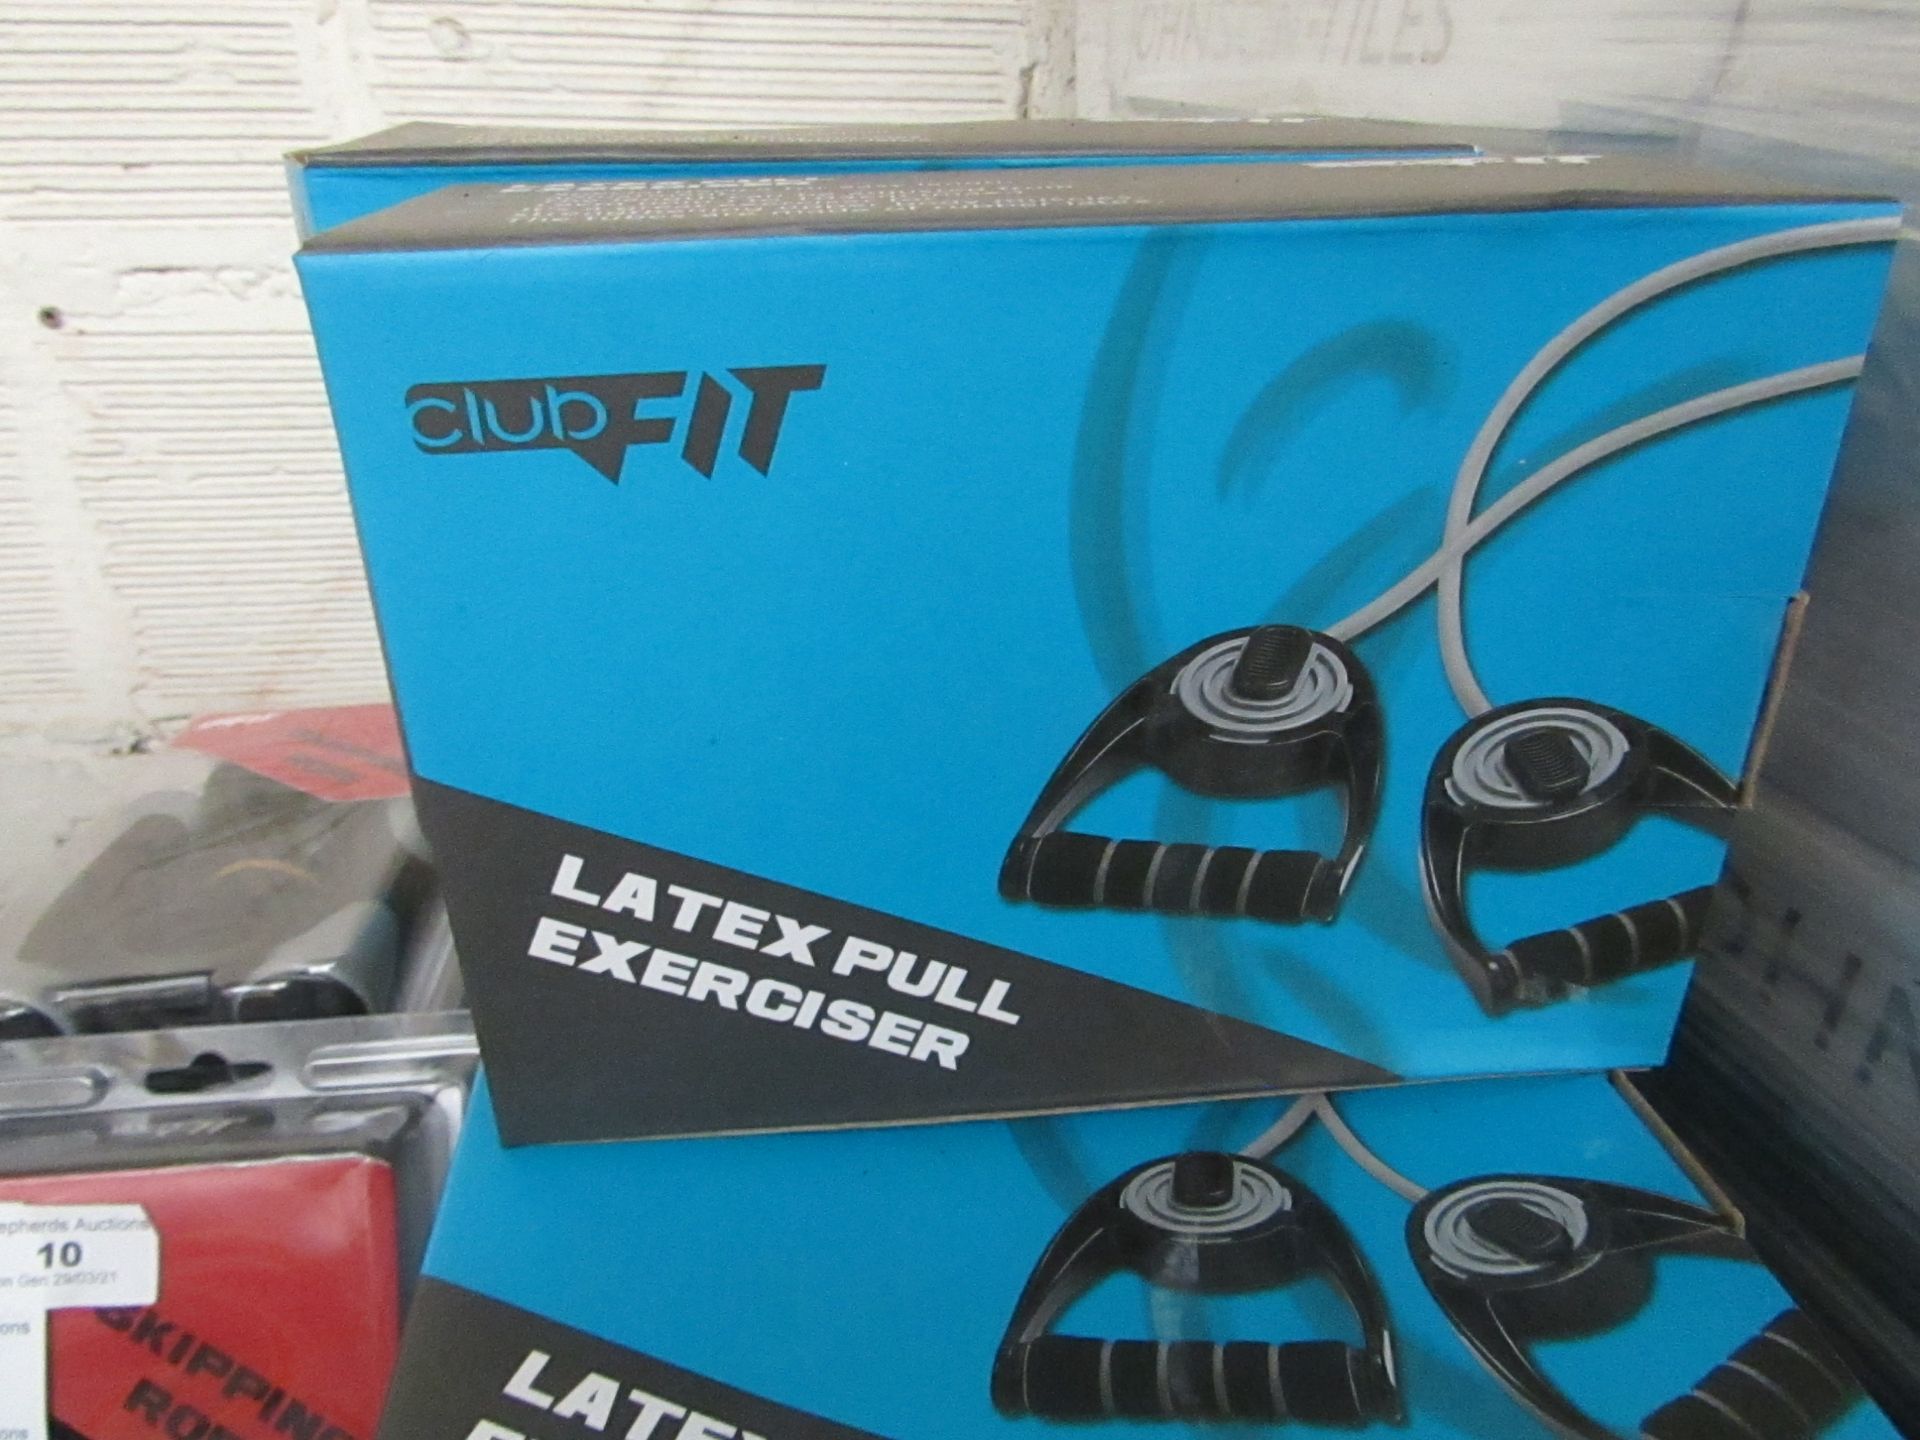 ClubFit - Latex Pull Exerciser - New & Boxed.